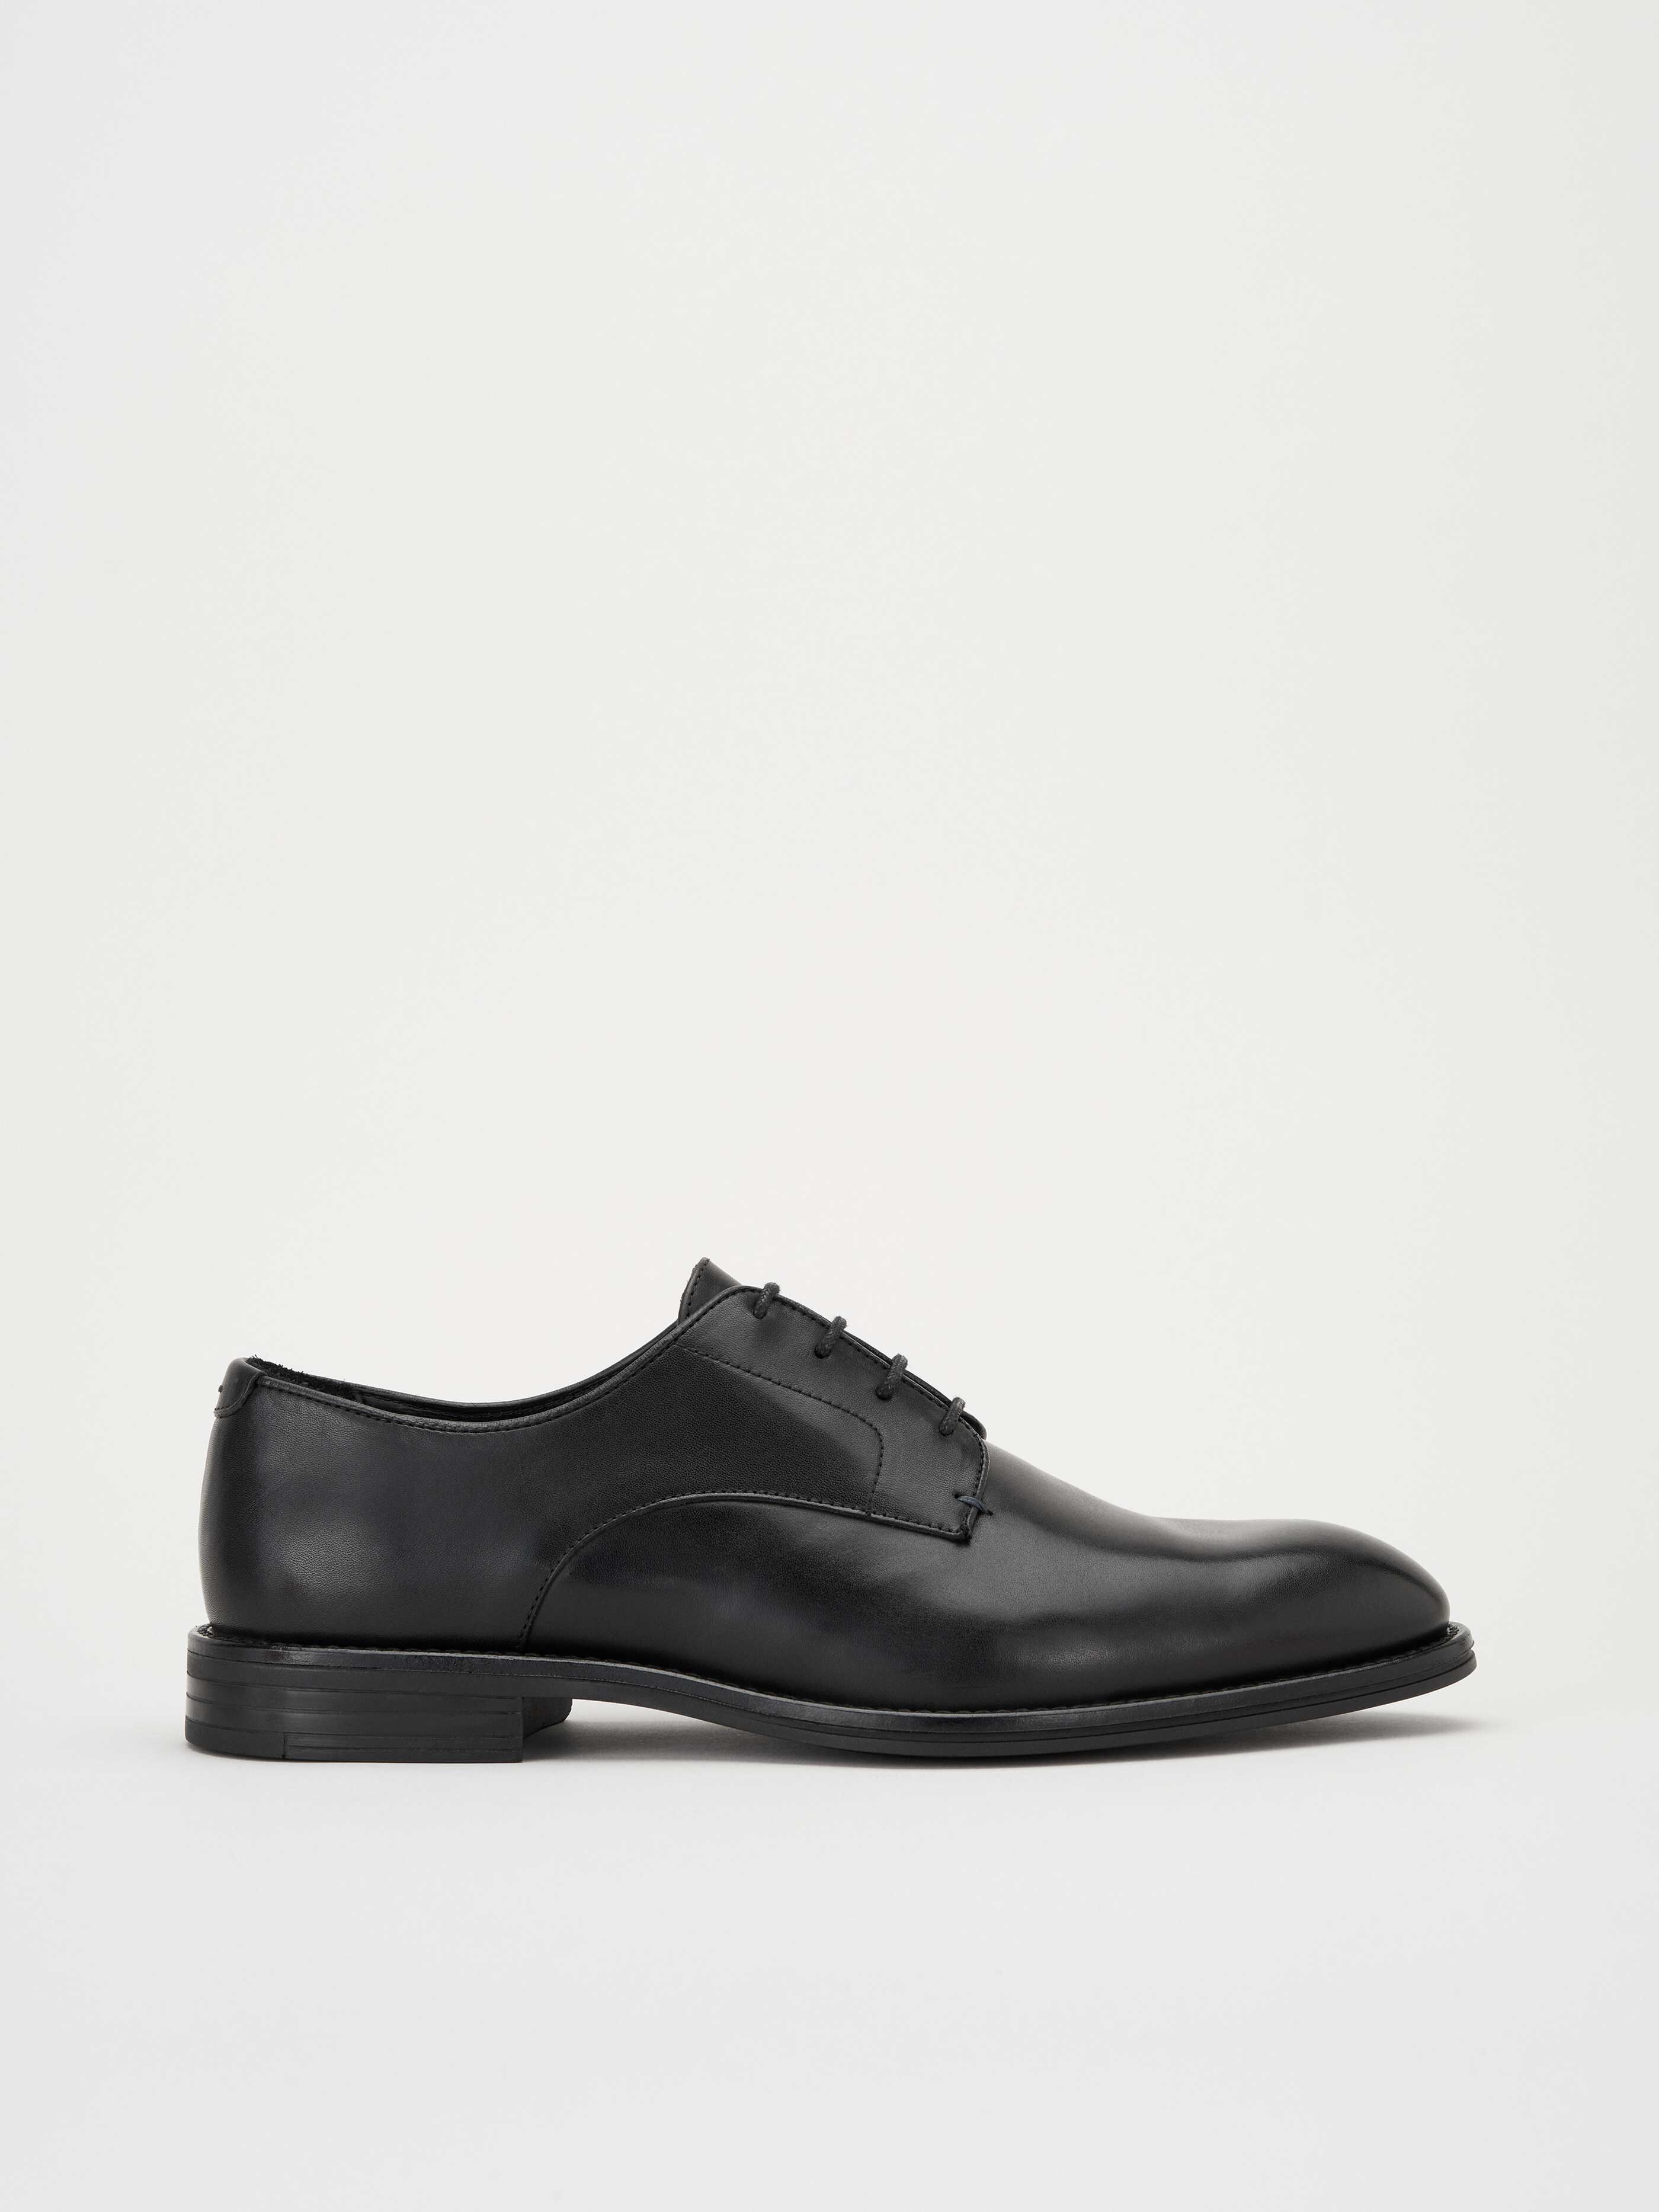 Trent Shoes - Buy Shoes online